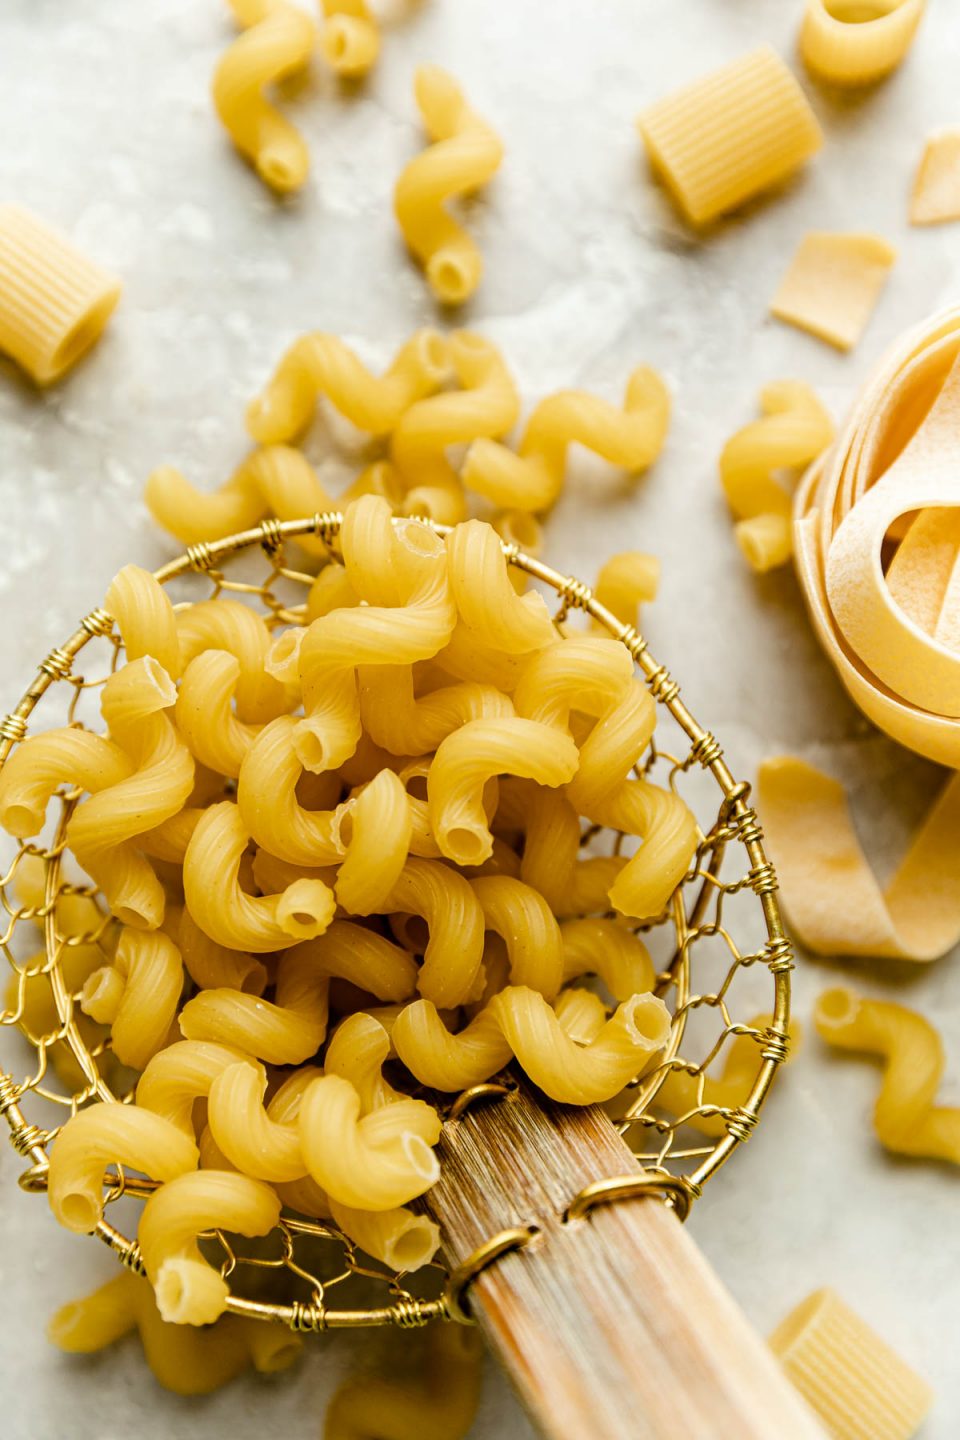 An overhead shot of a spider strainer filled with raw uncooked cavatappi pasta from DeLallo Foods. The spider strainer rests on a creamy white plaster surface. Pieces of cavatappi, Mezzi Rigatoni, and pappardelle are scattered around the spider strainer.